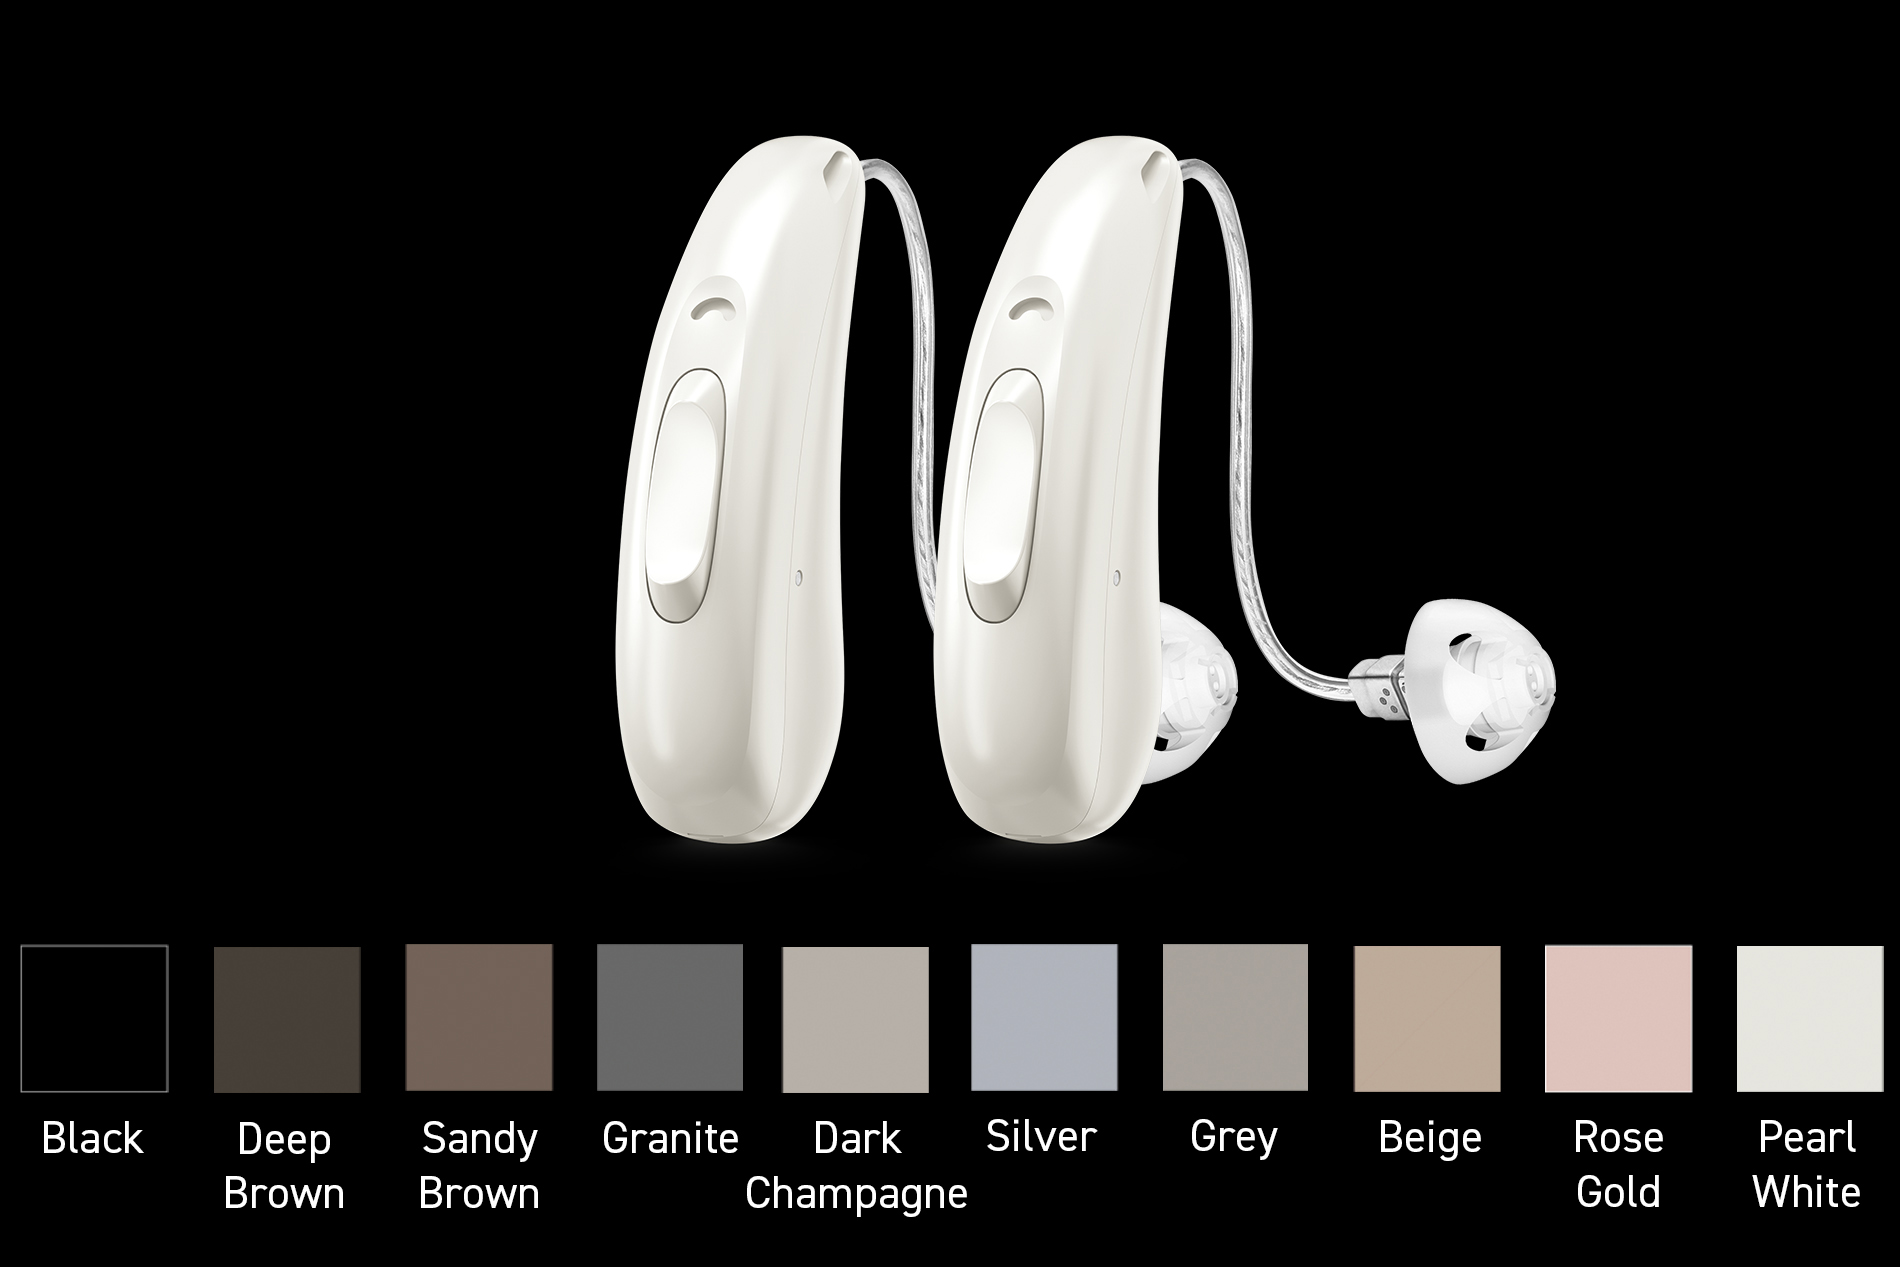 pair of mcore r hearing aids and color options